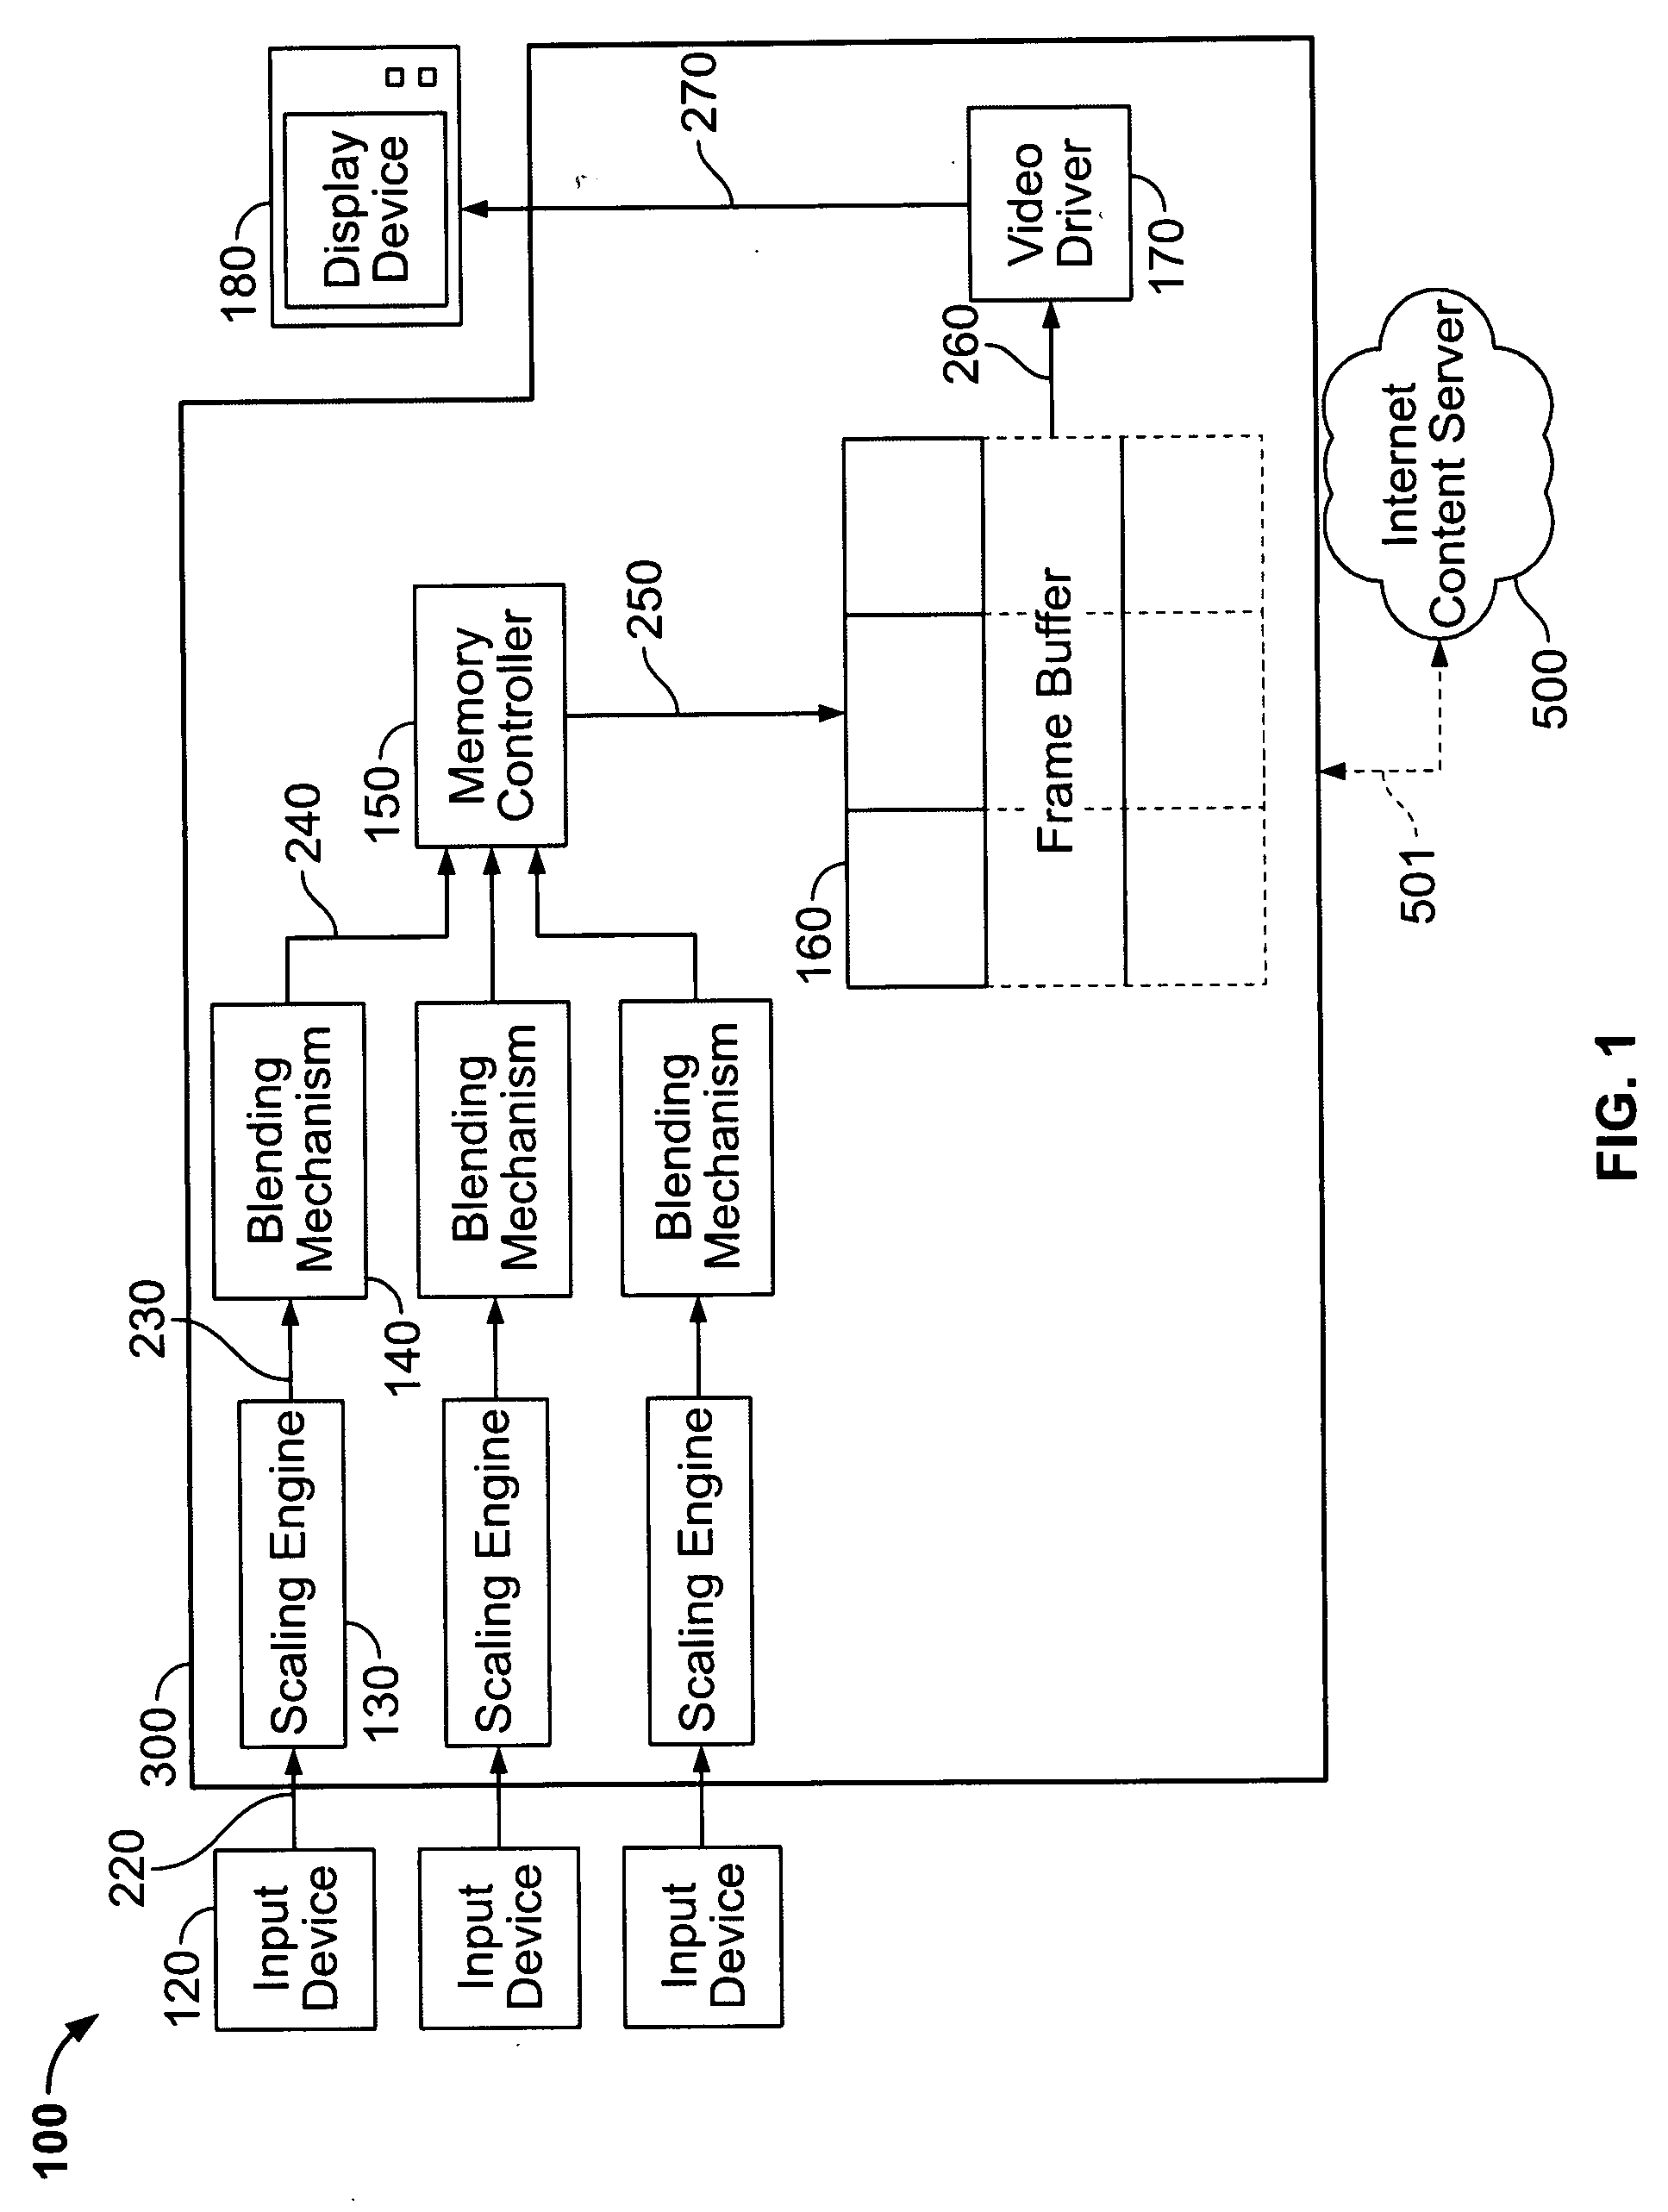 System and methods for the simultaneous display of multiple video signals in high definition format